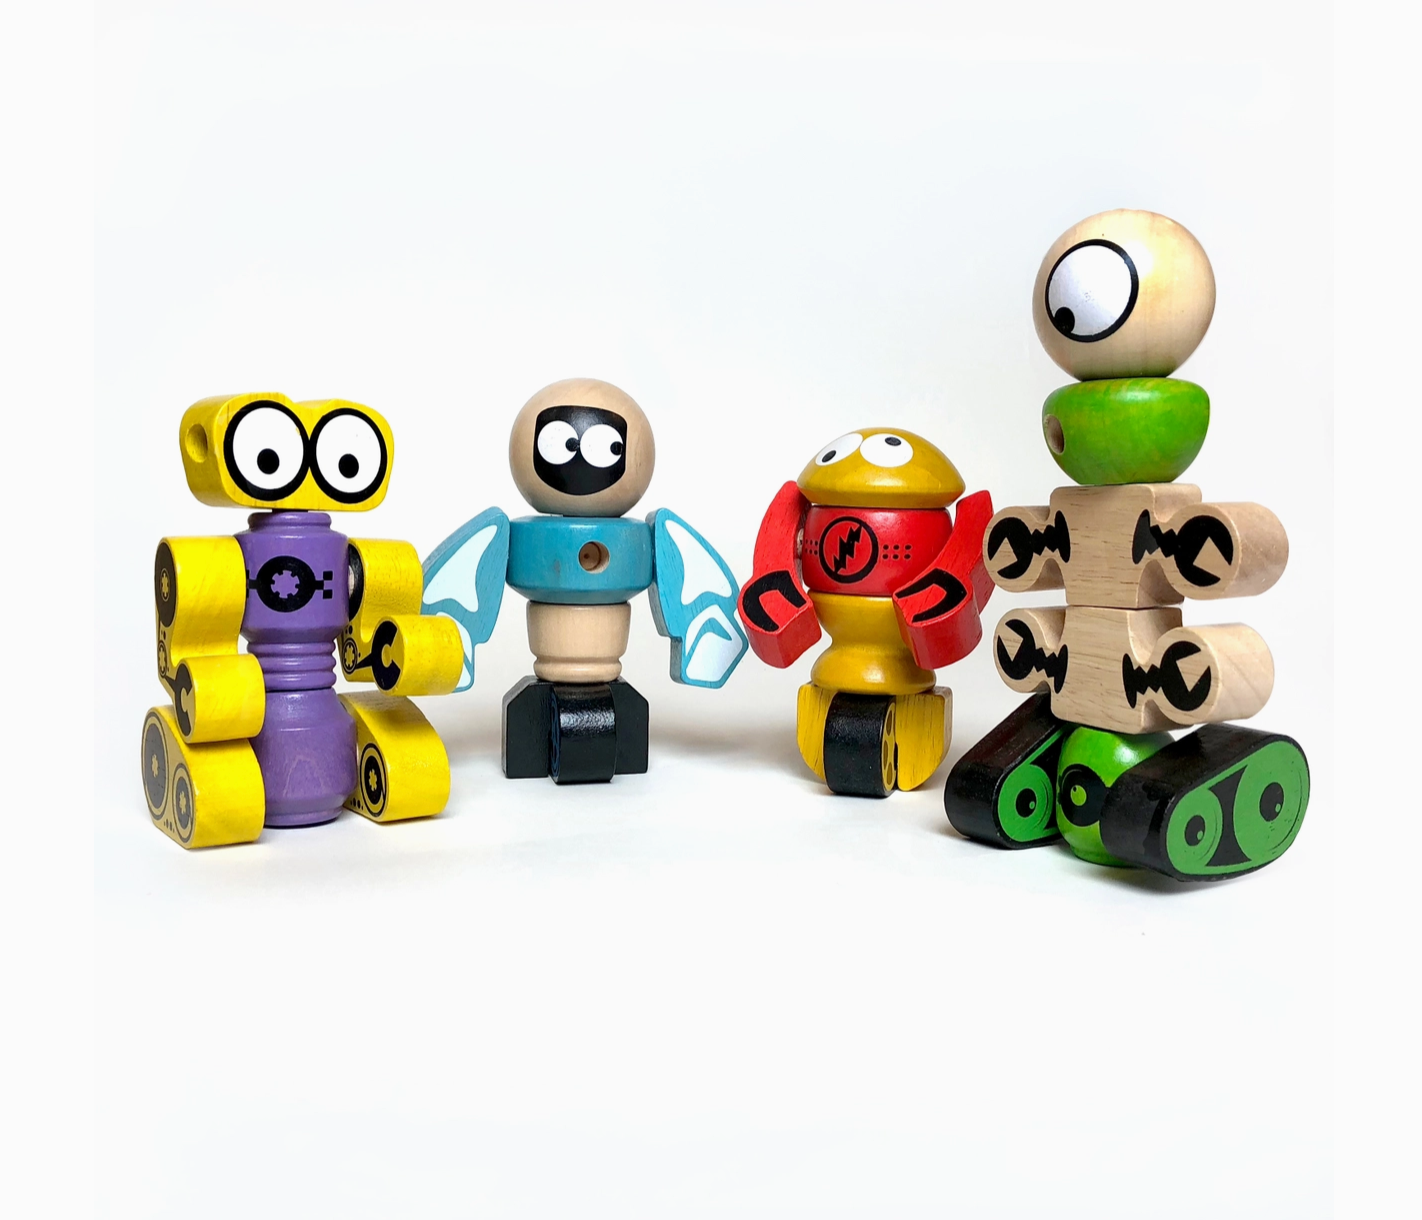 Tinker Totter Robots - 28 Piece Character Playset